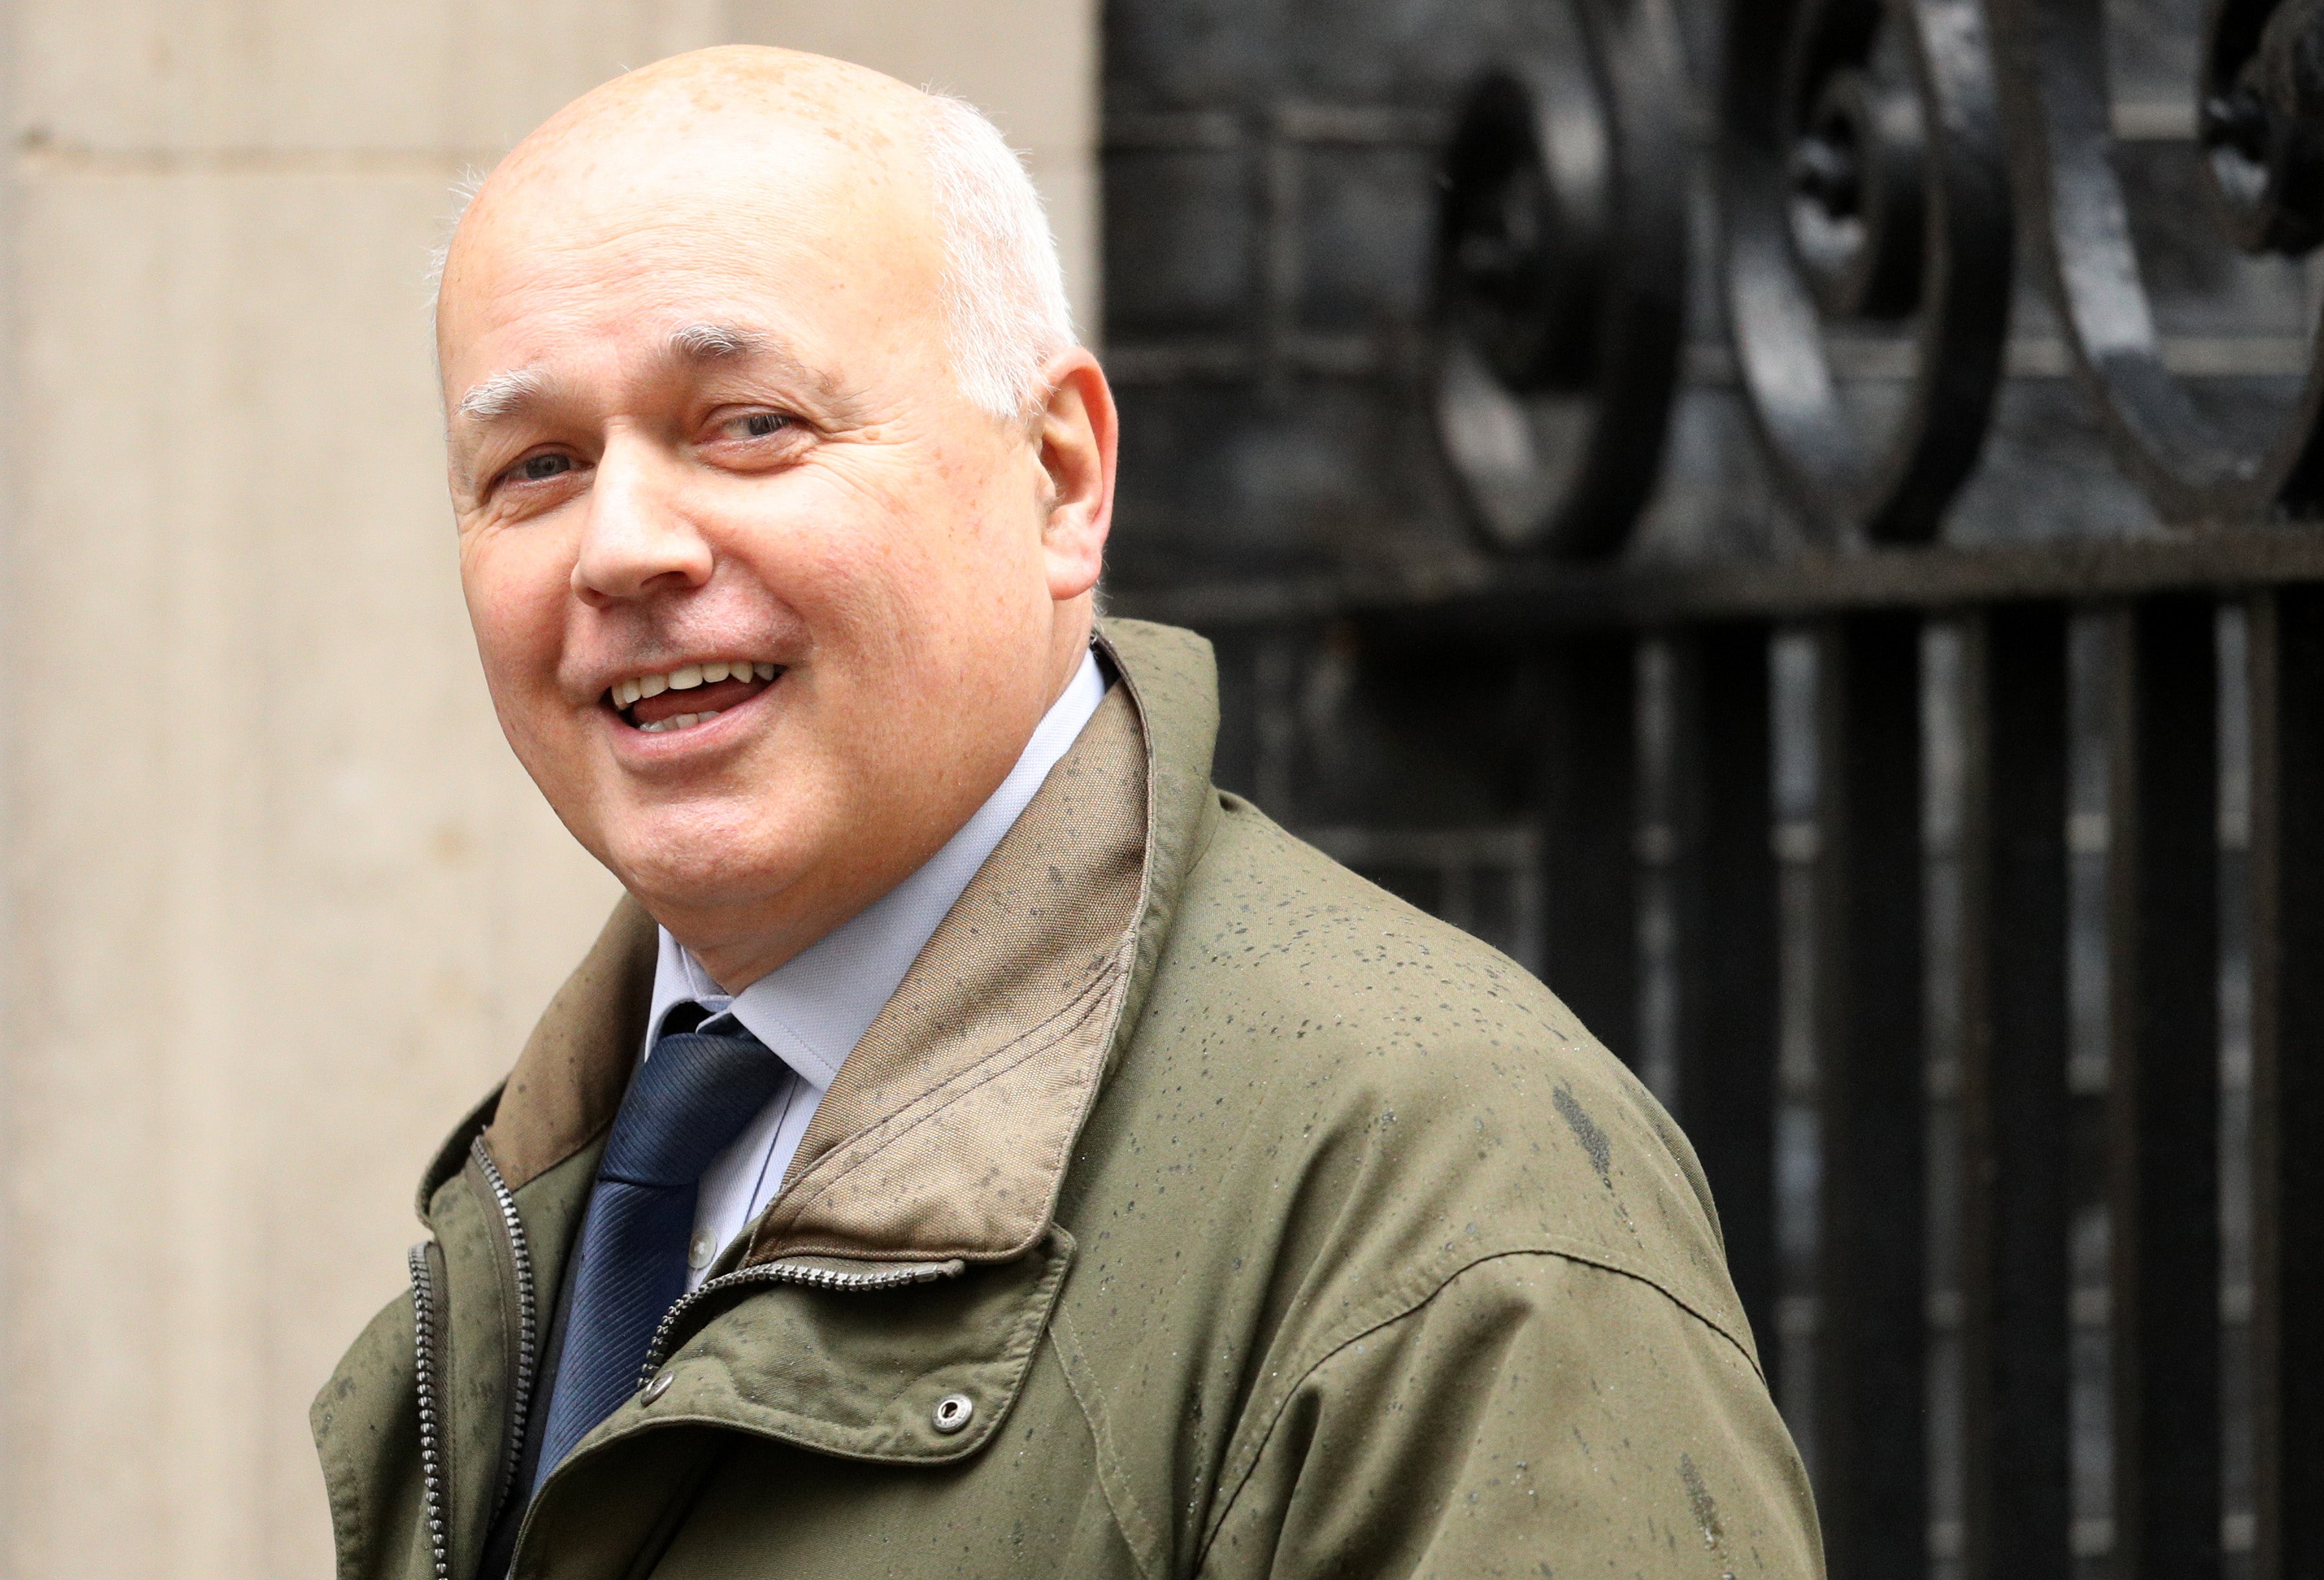 Universal Credit was the flagship project of former work and pensions secretary Iain Duncan Smith